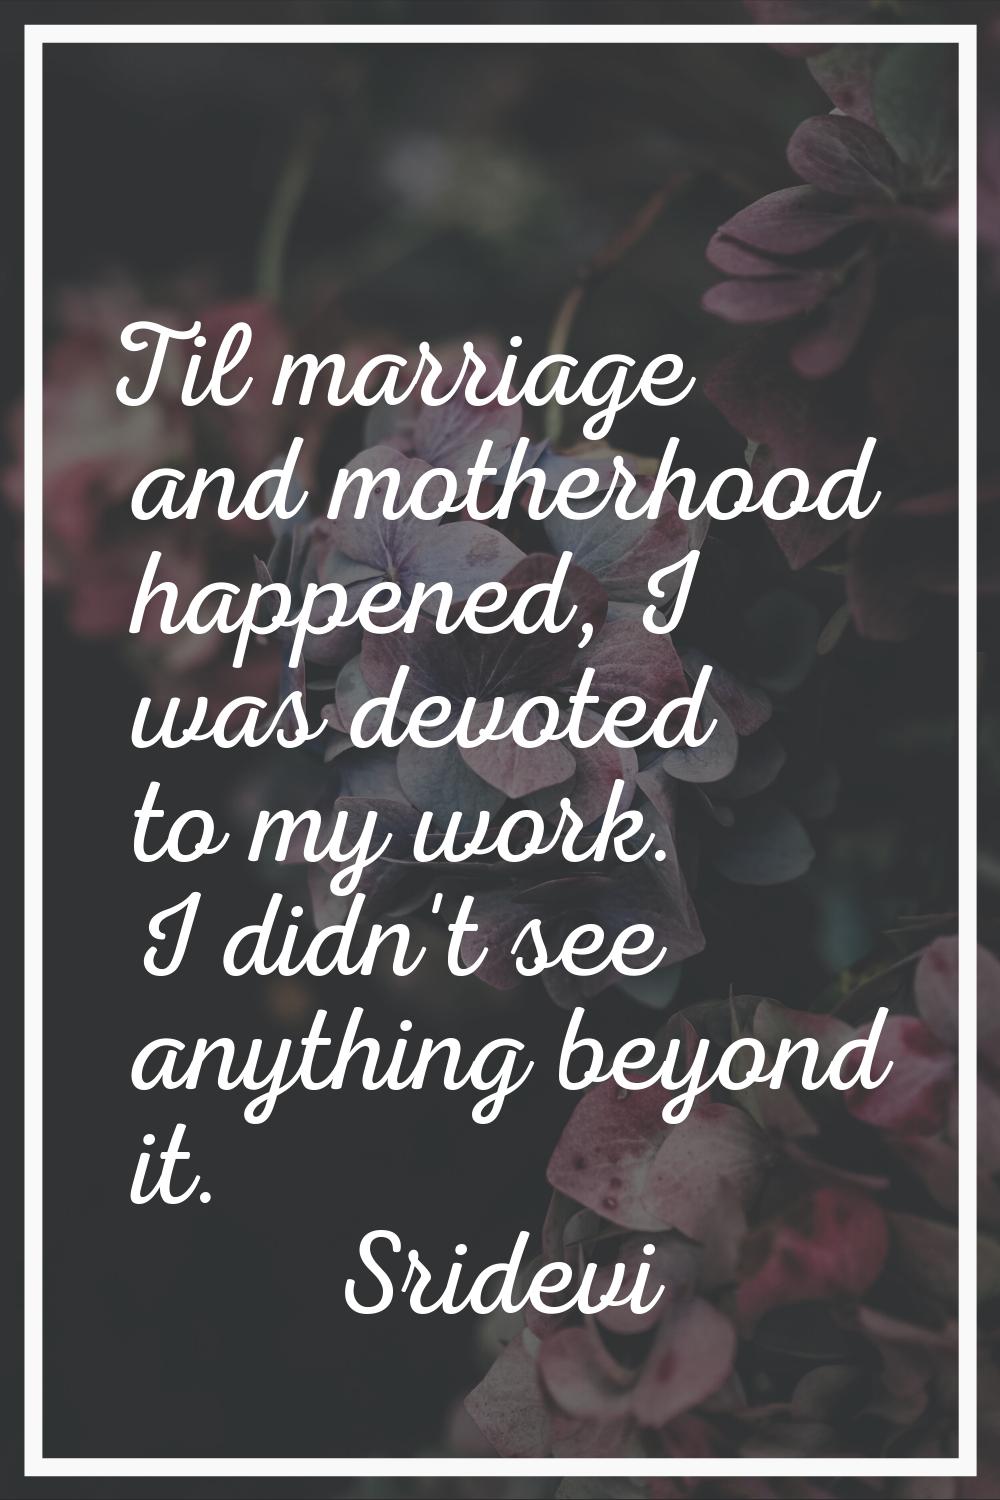 Til marriage and motherhood happened, I was devoted to my work. I didn't see anything beyond it.